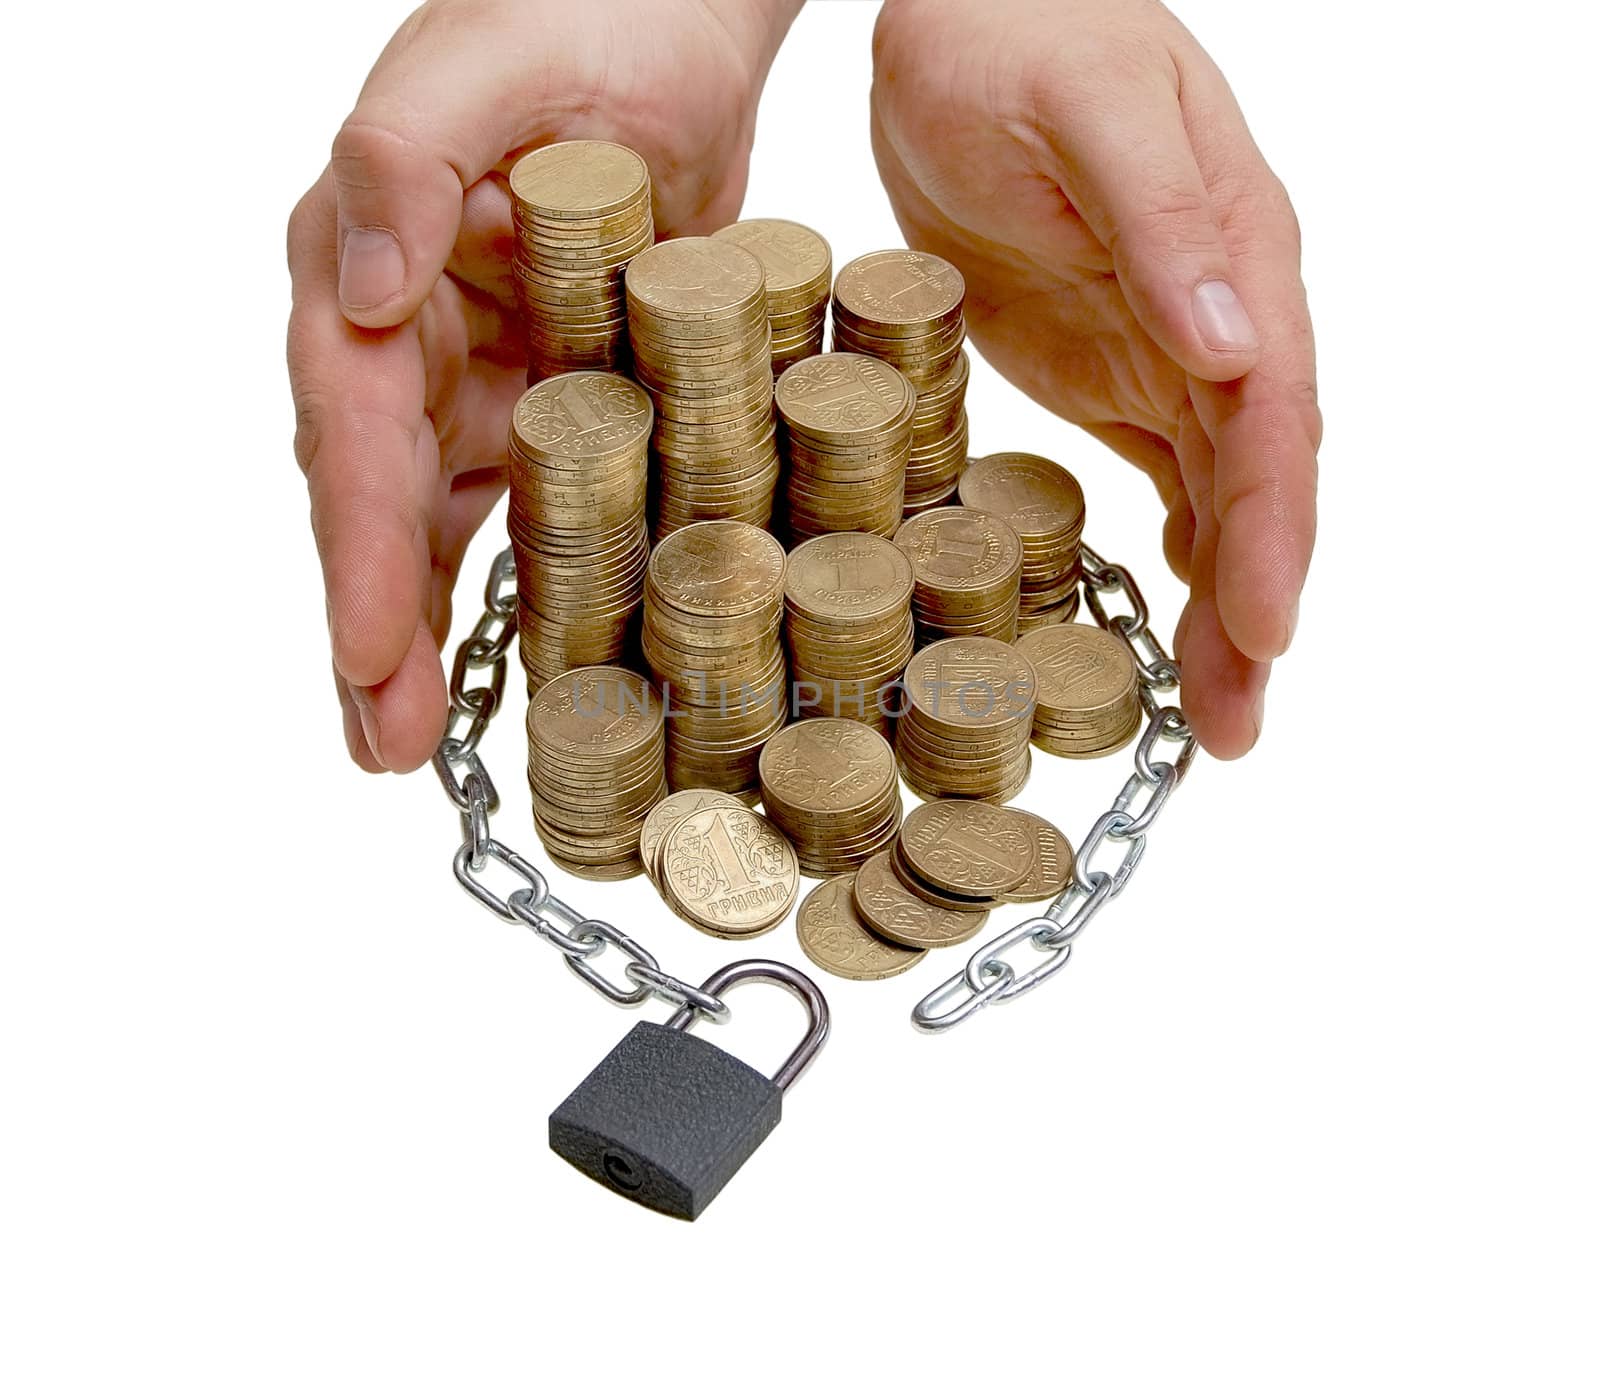 It is a lot of coins piled and tied with a chain,
isolated on a white background.